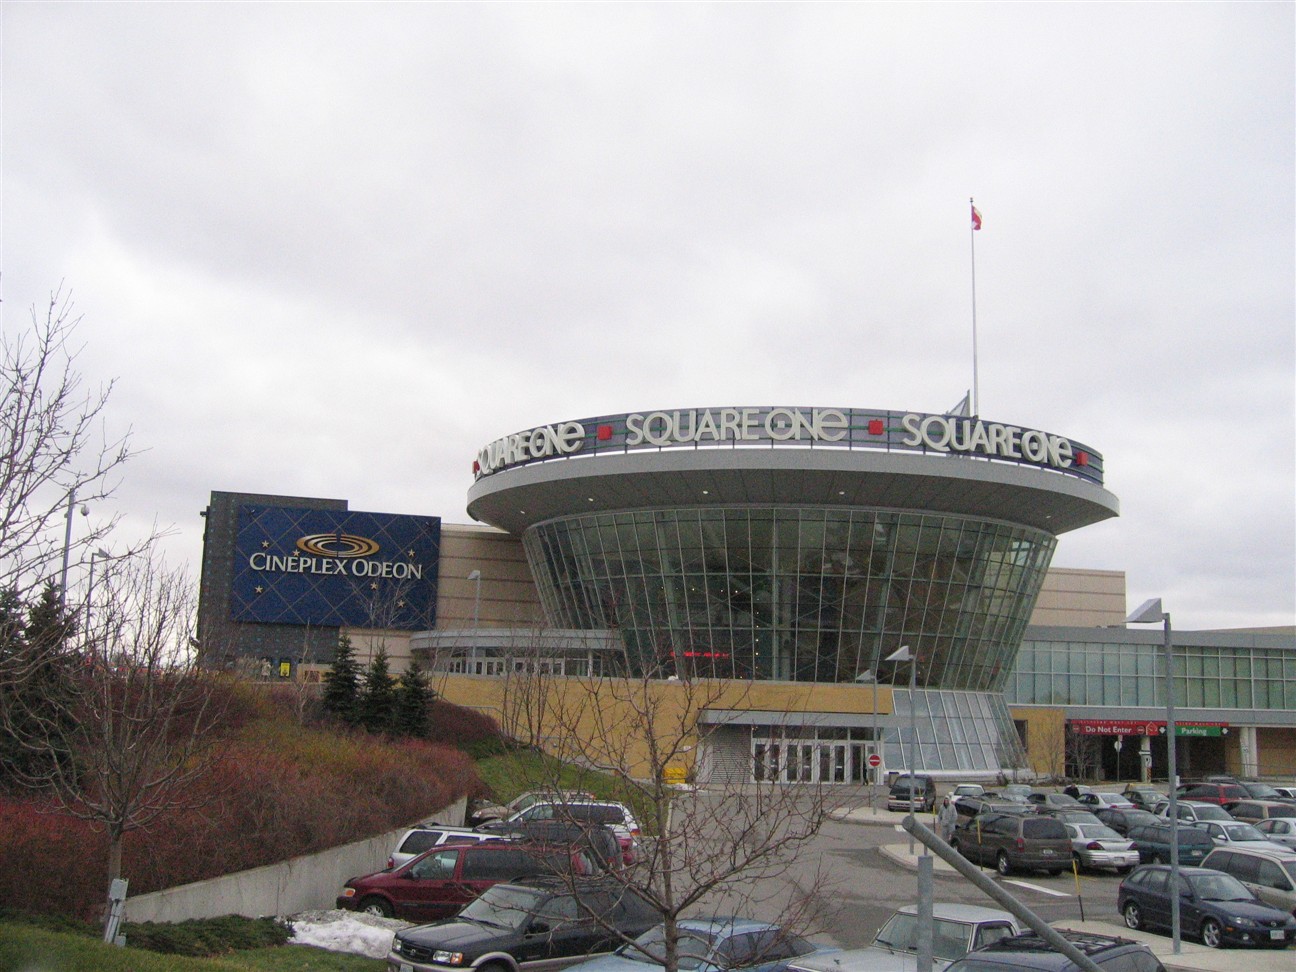 Square One Shopping Center in Mississauga, Ontario, Canada